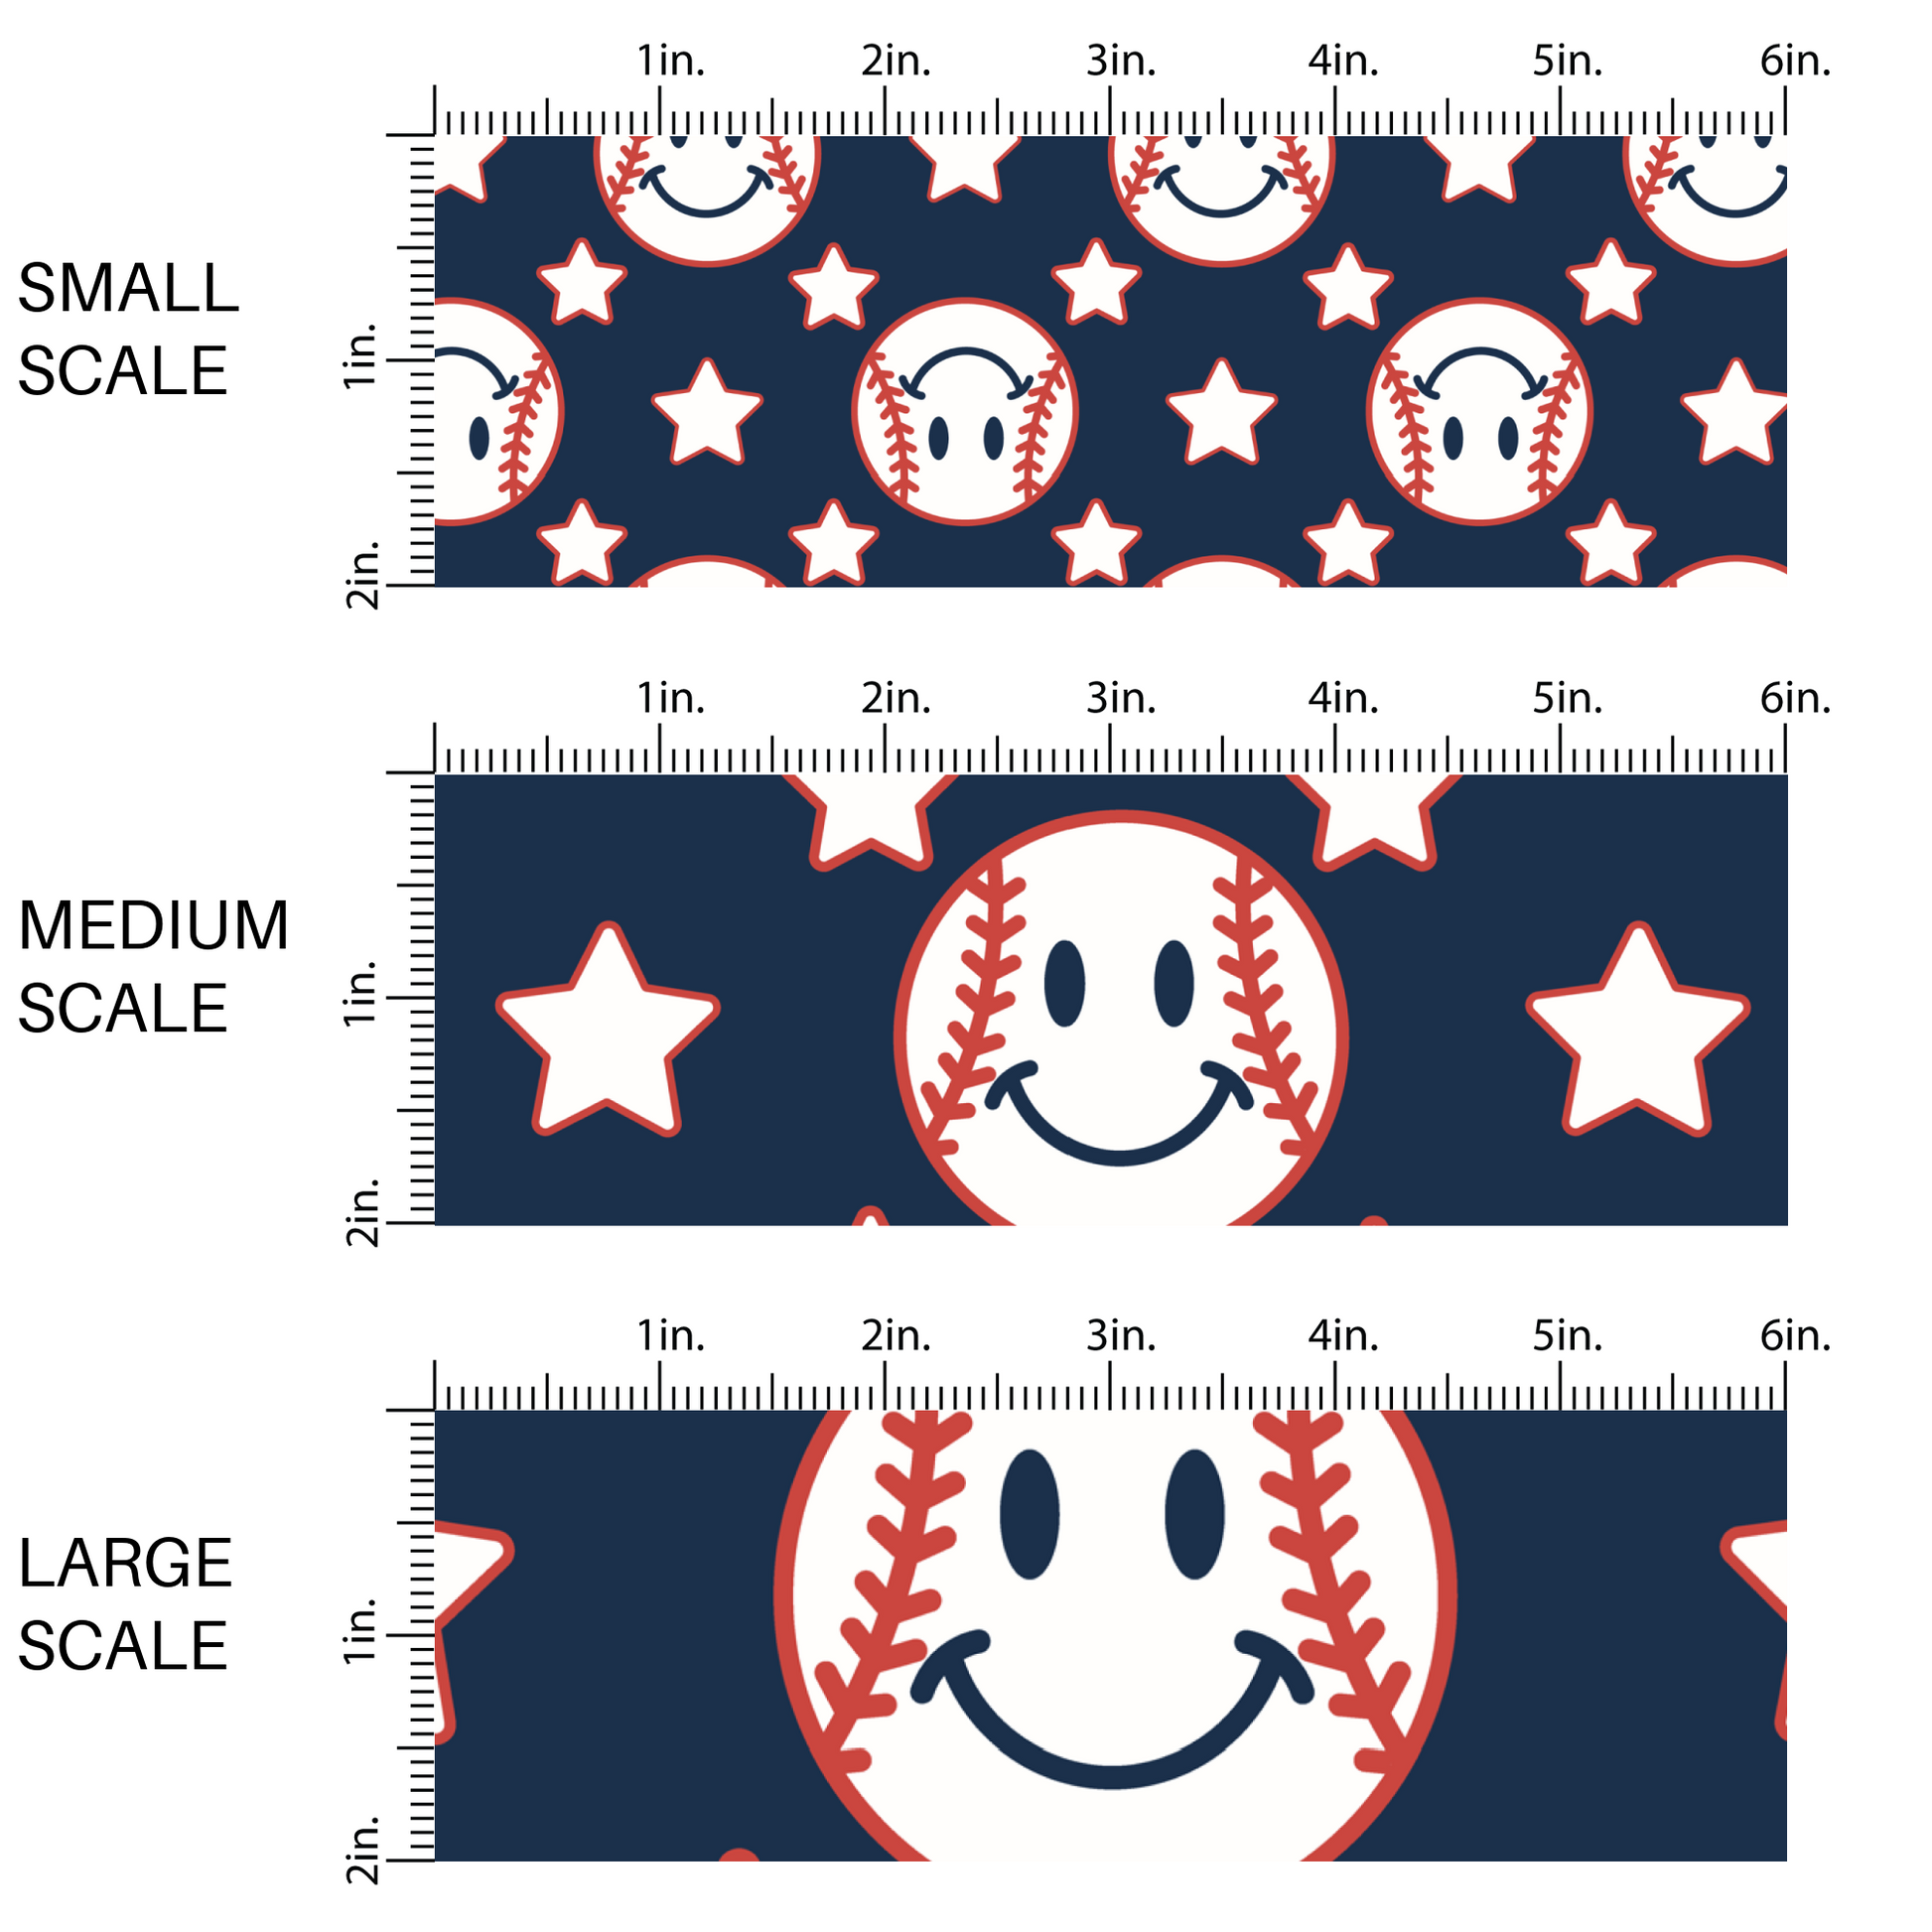 White smiley face baseballs and white stars on navy blue fabric by the yard scaled image guide.